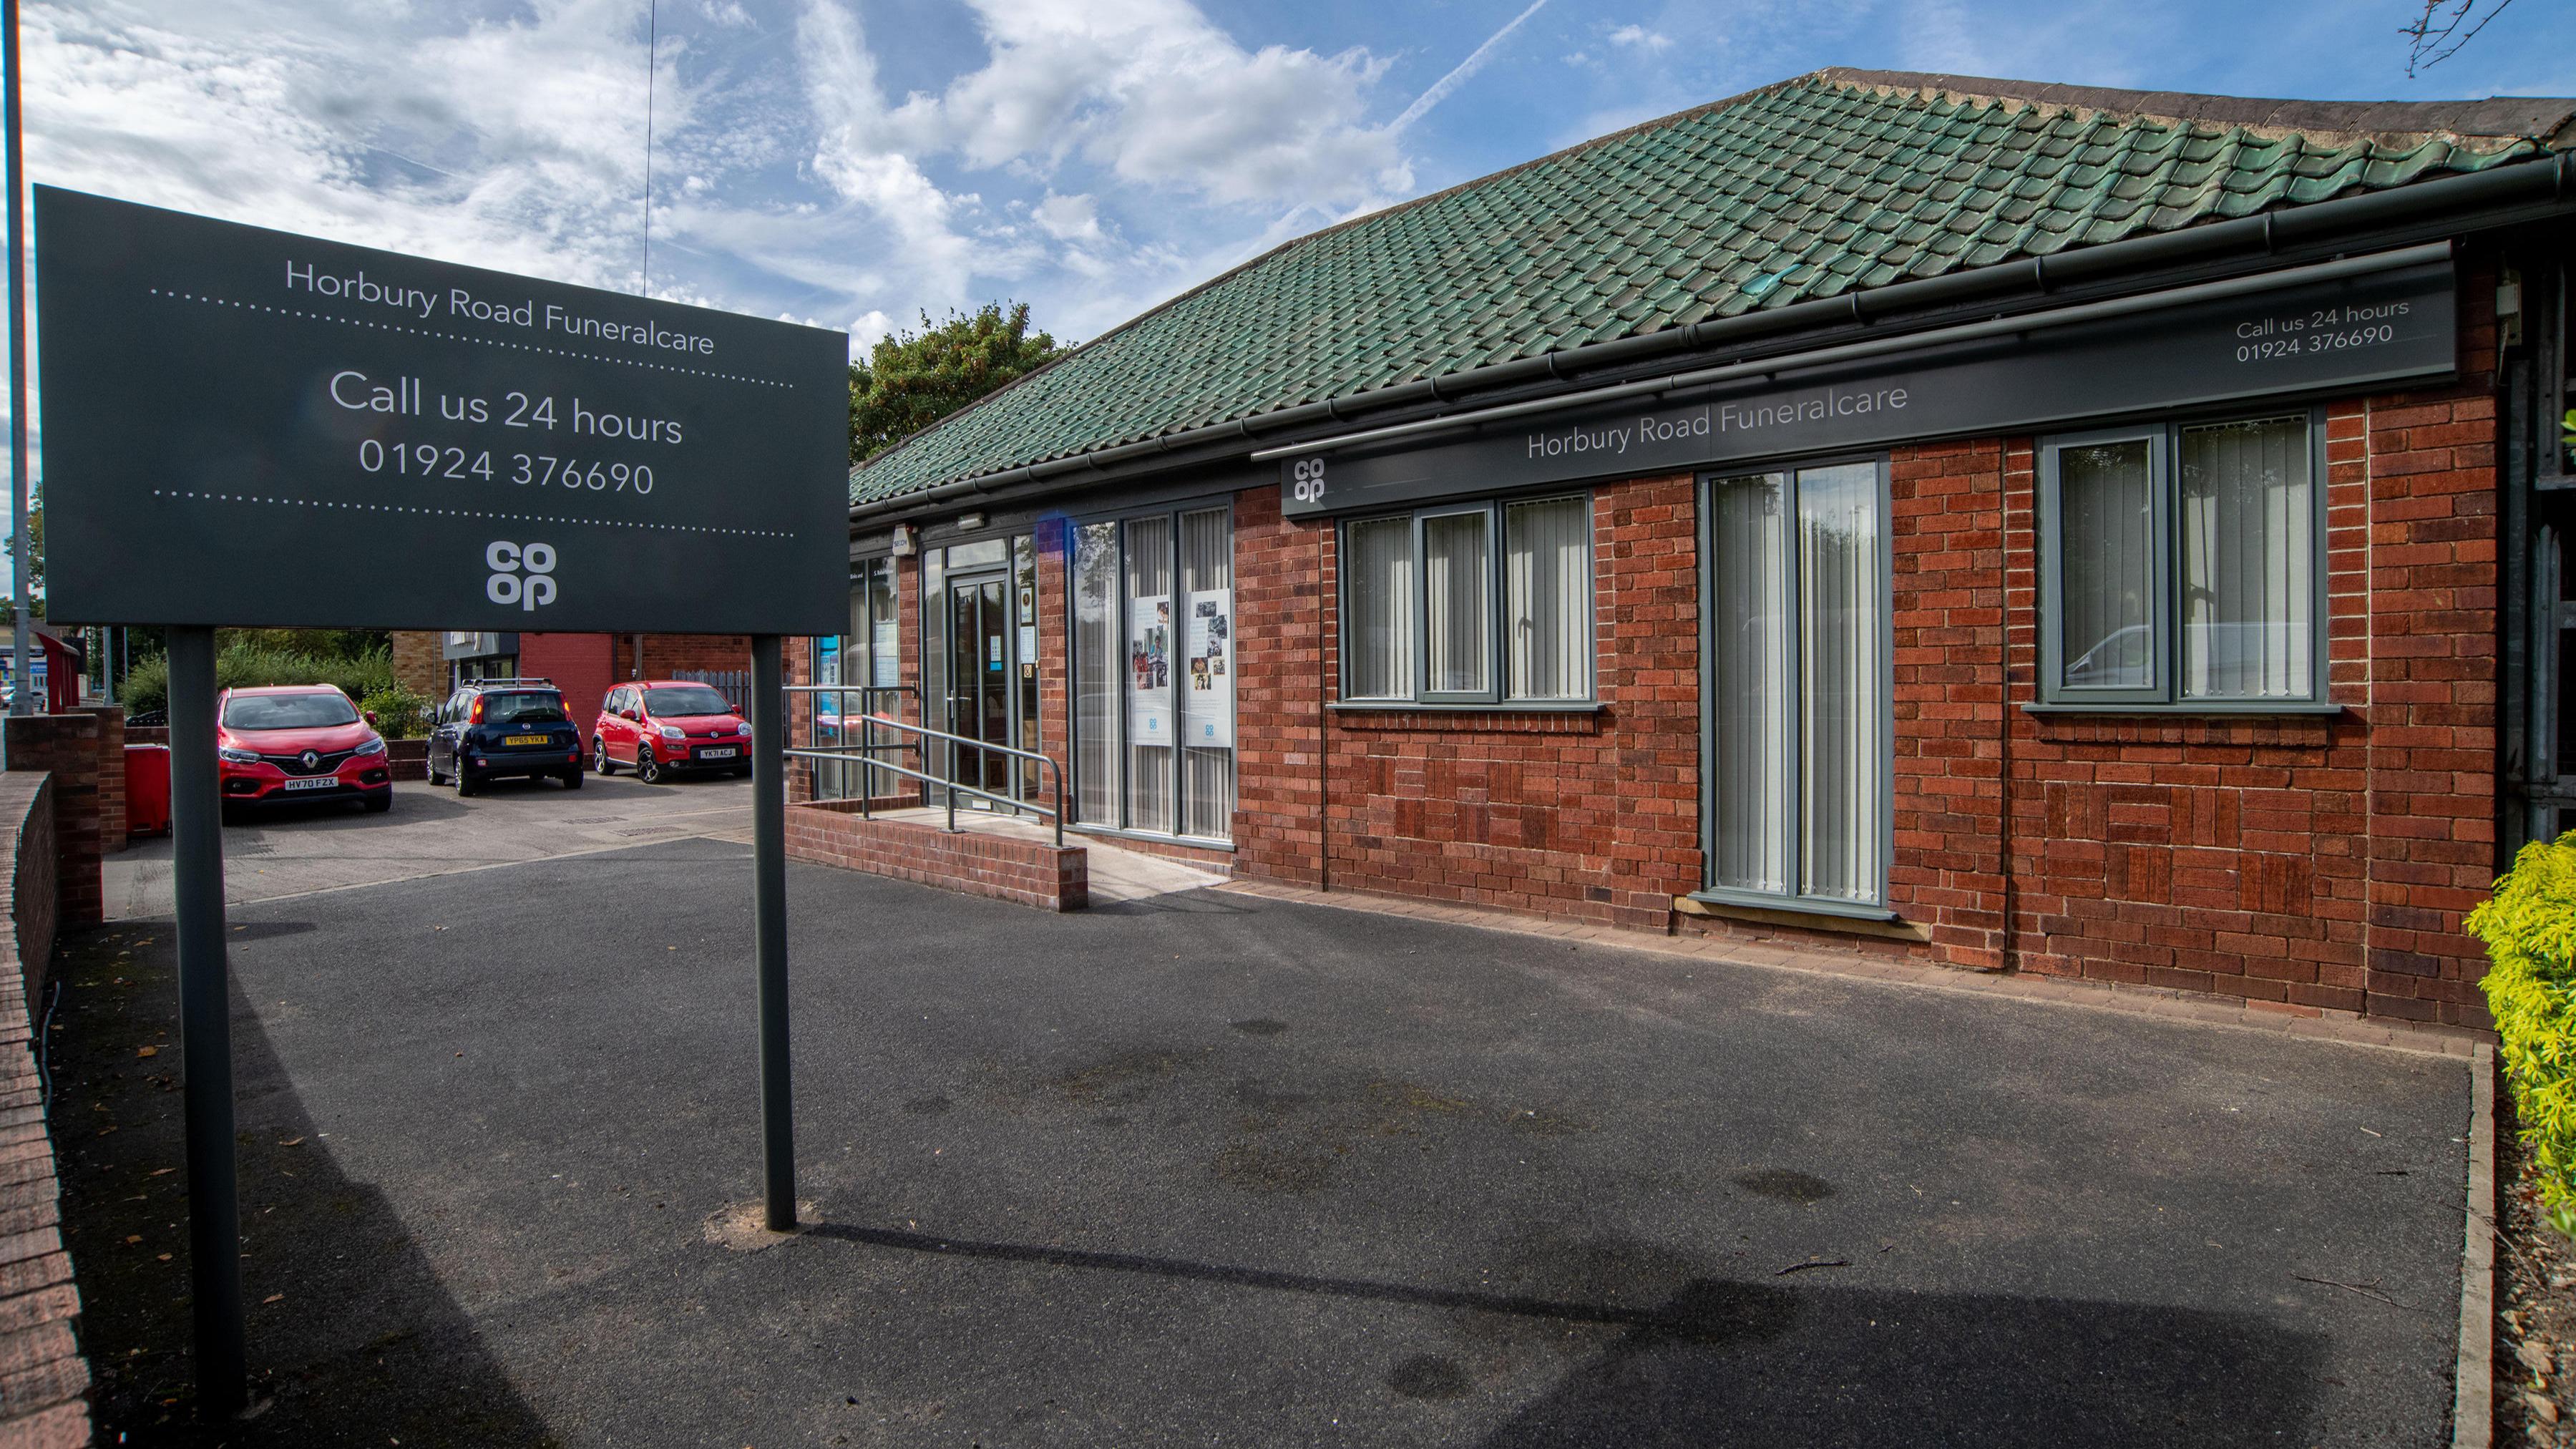 Images Horbury Road Funeralcare